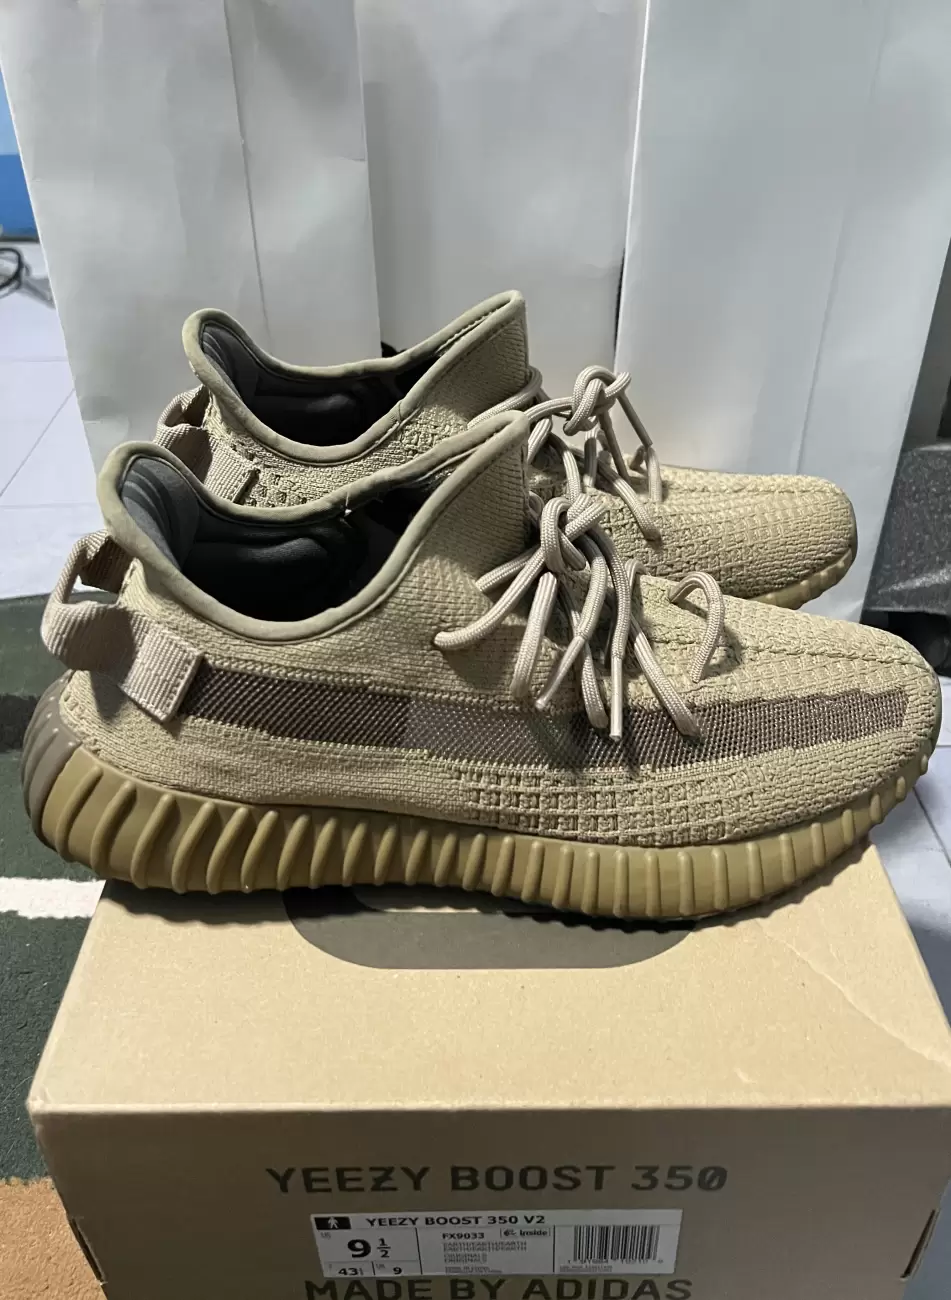 Adidas Yeezy Boost 350 V2 'Earth' Shoes - Size 12.5